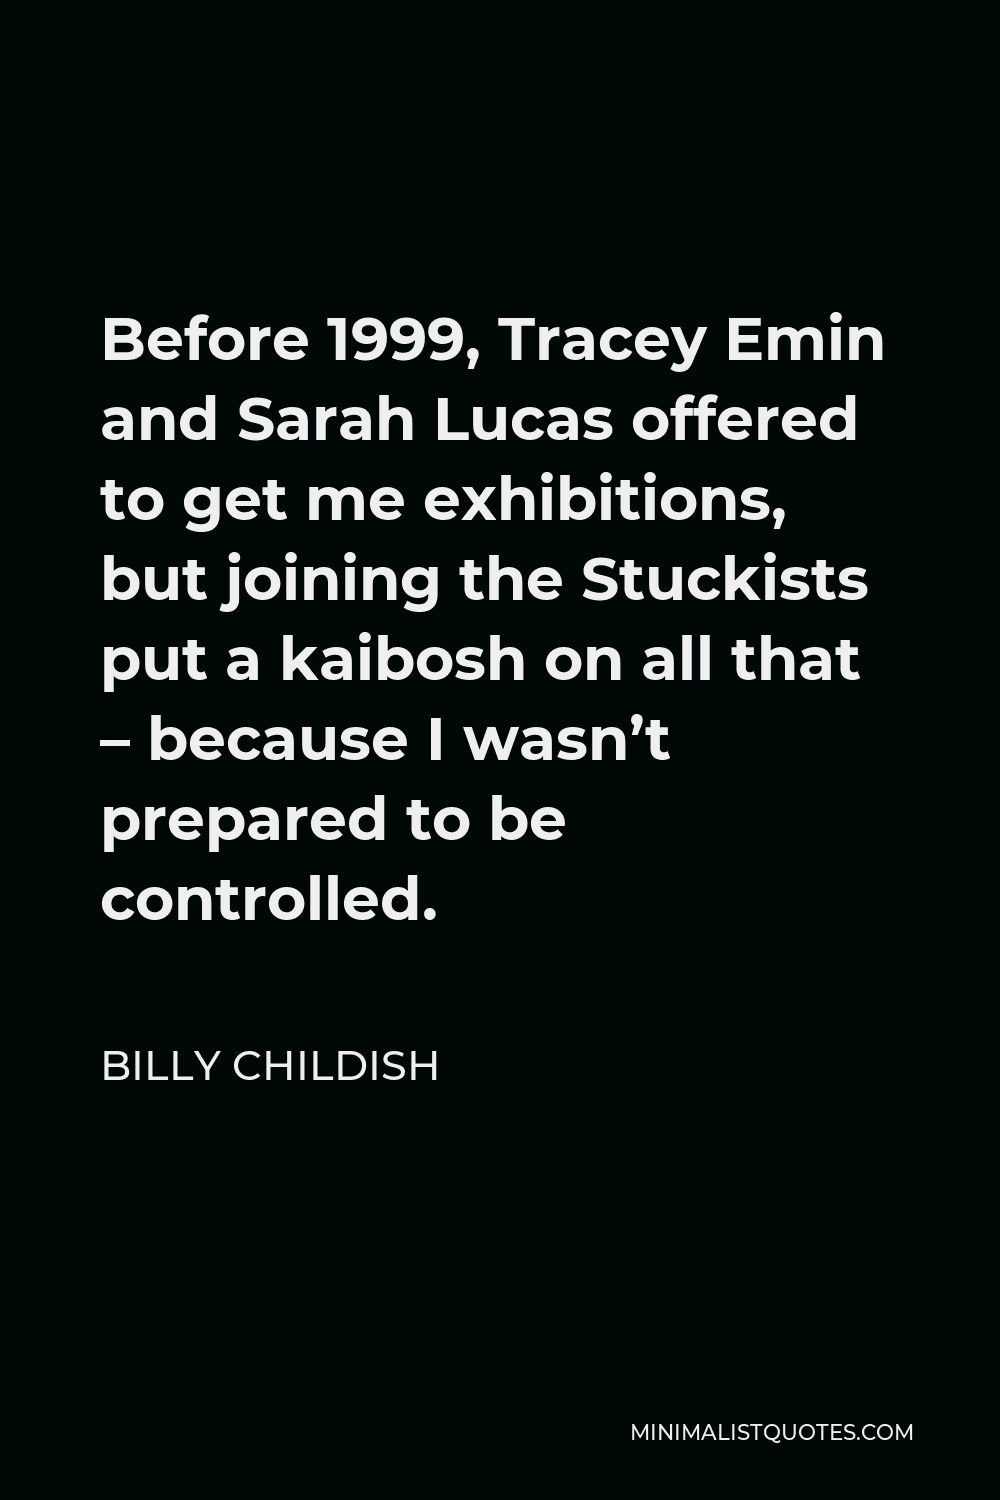 Billy Childish Quote - Before 1999, Tracey Emin and Sarah Lucas offered to get me exhibitions, but joining the Stuckists put a kaibosh on all that – because I wasn’t prepared to be controlled.